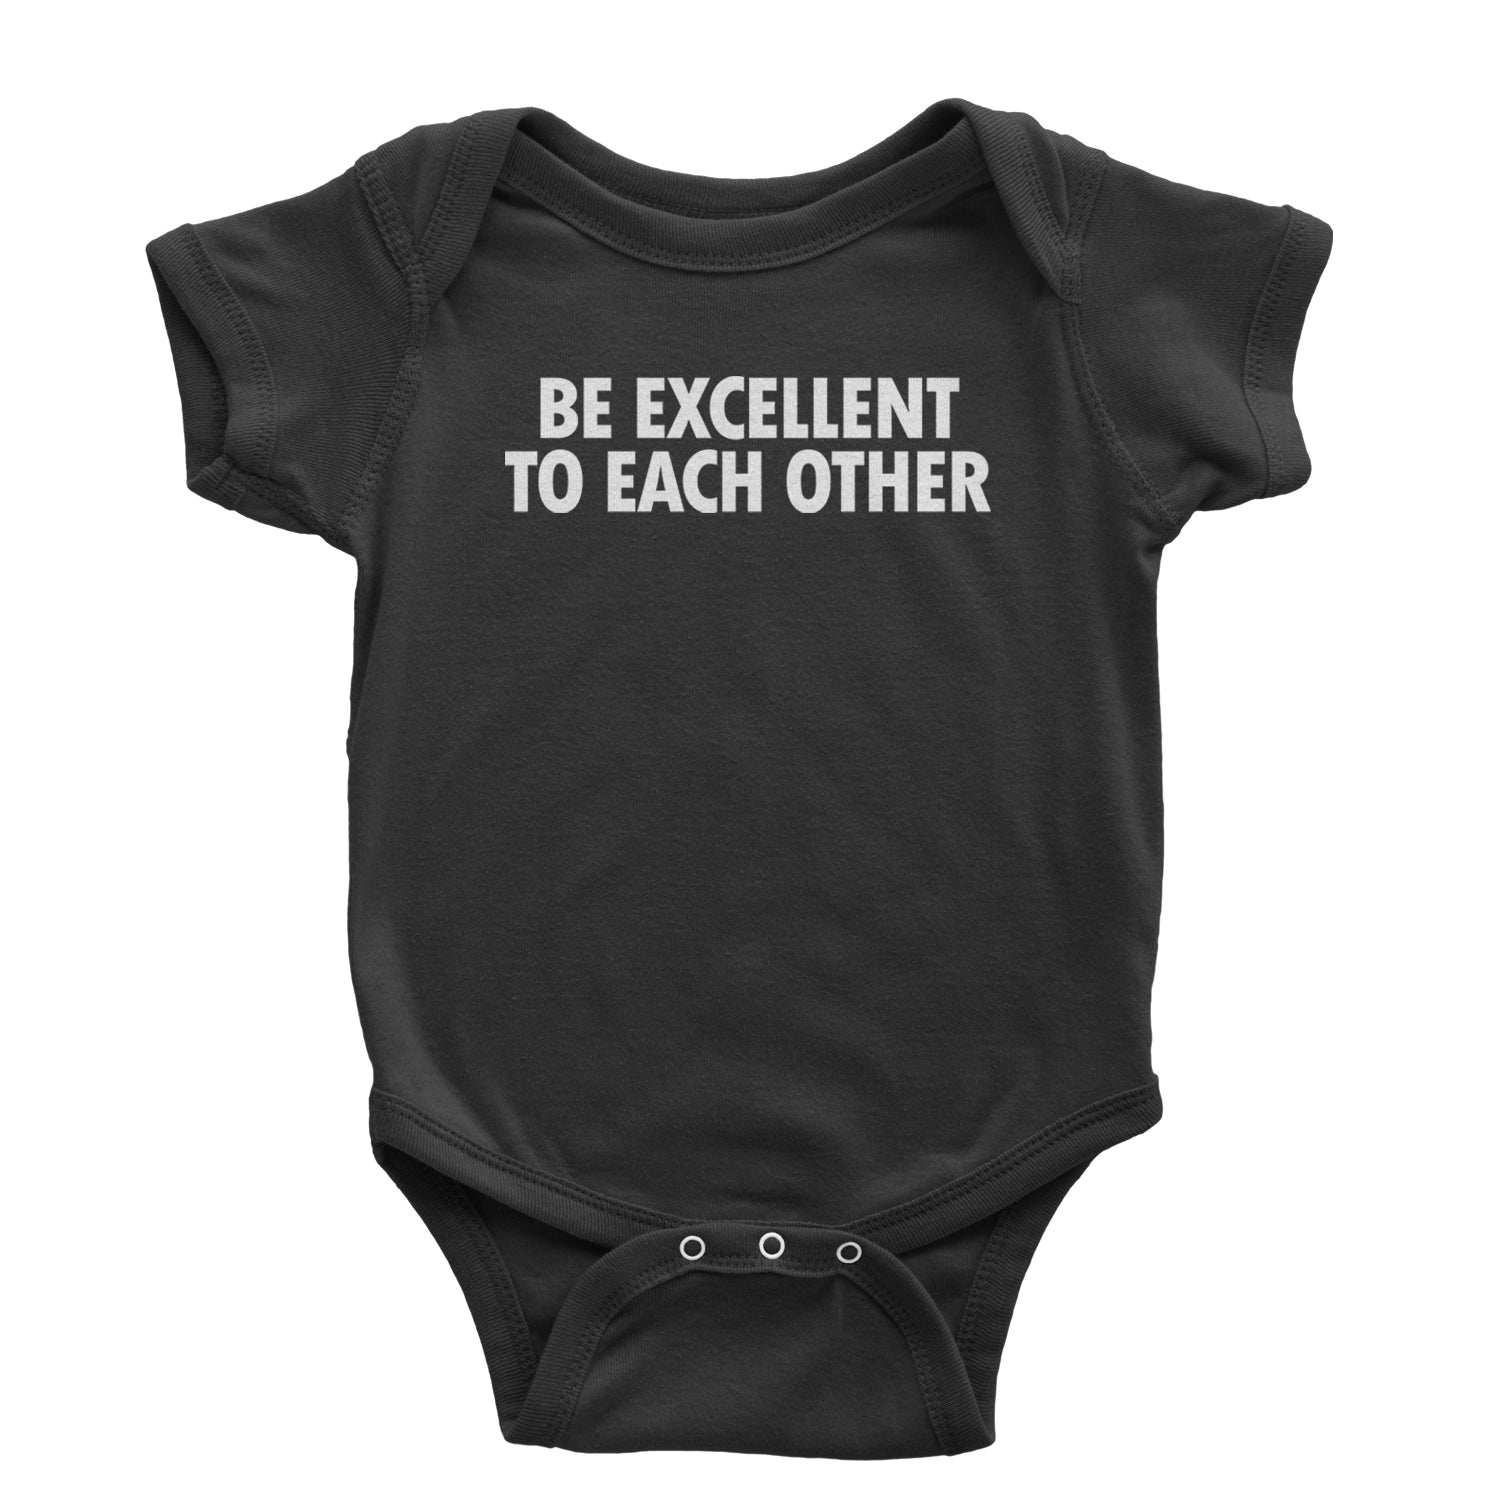 Be Excellent To Each Other Infant One-Piece Romper Bodysuit and Toddler T-shirt